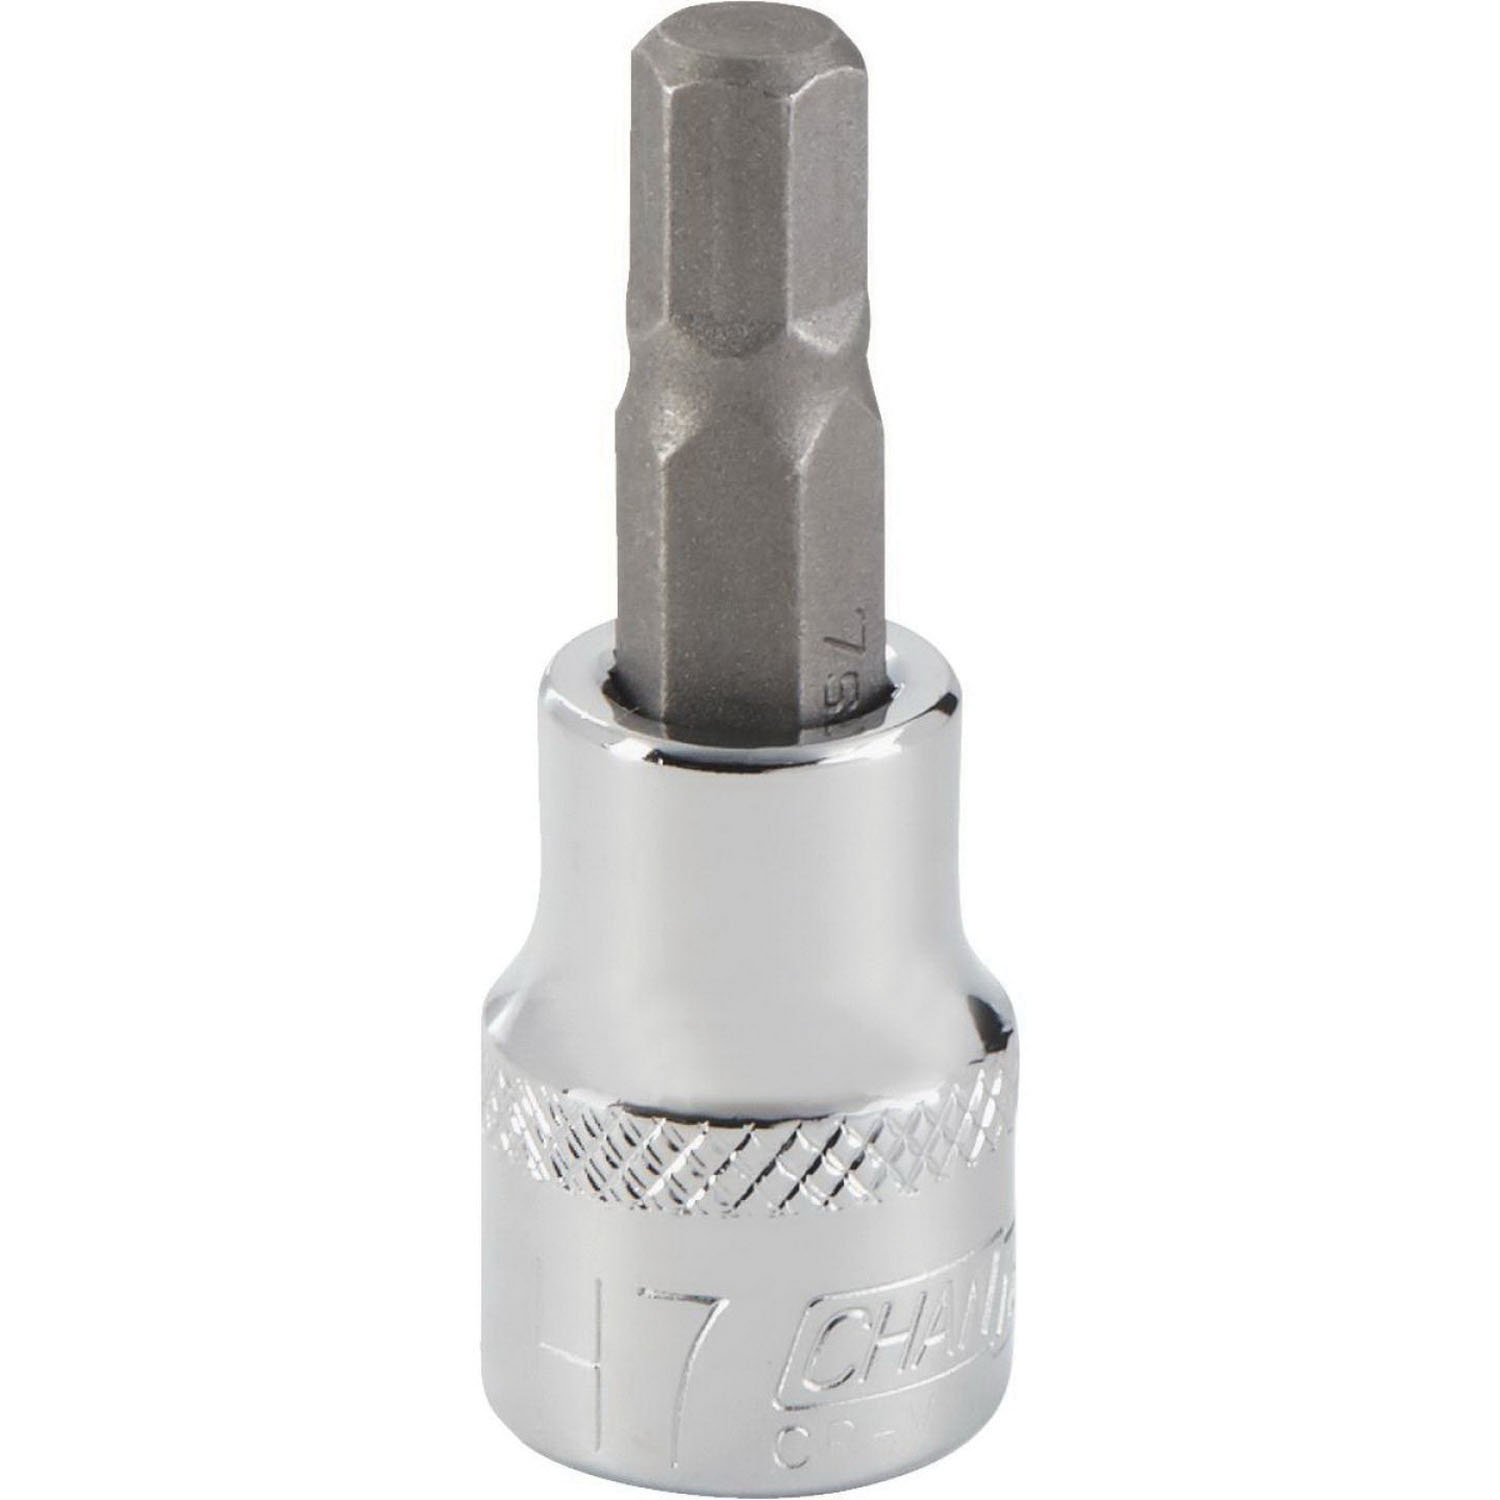 9421 Needle Valve, Straight, Brass, For: Evaporative Cooler Purge Systems